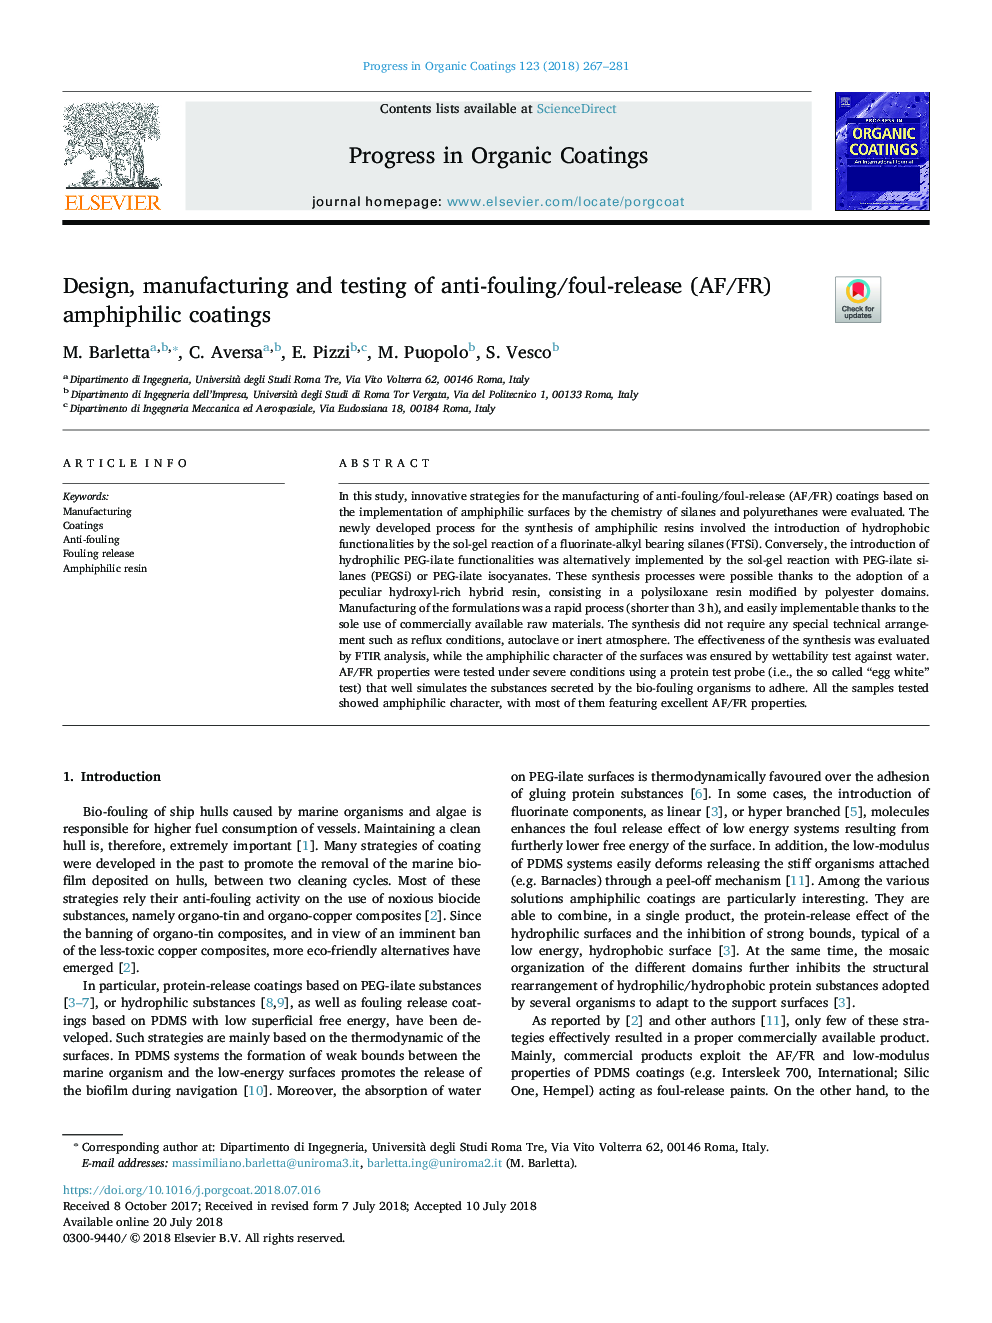 Design, manufacturing and testing of anti-fouling/foul-release (AF/FR) amphiphilic coatings